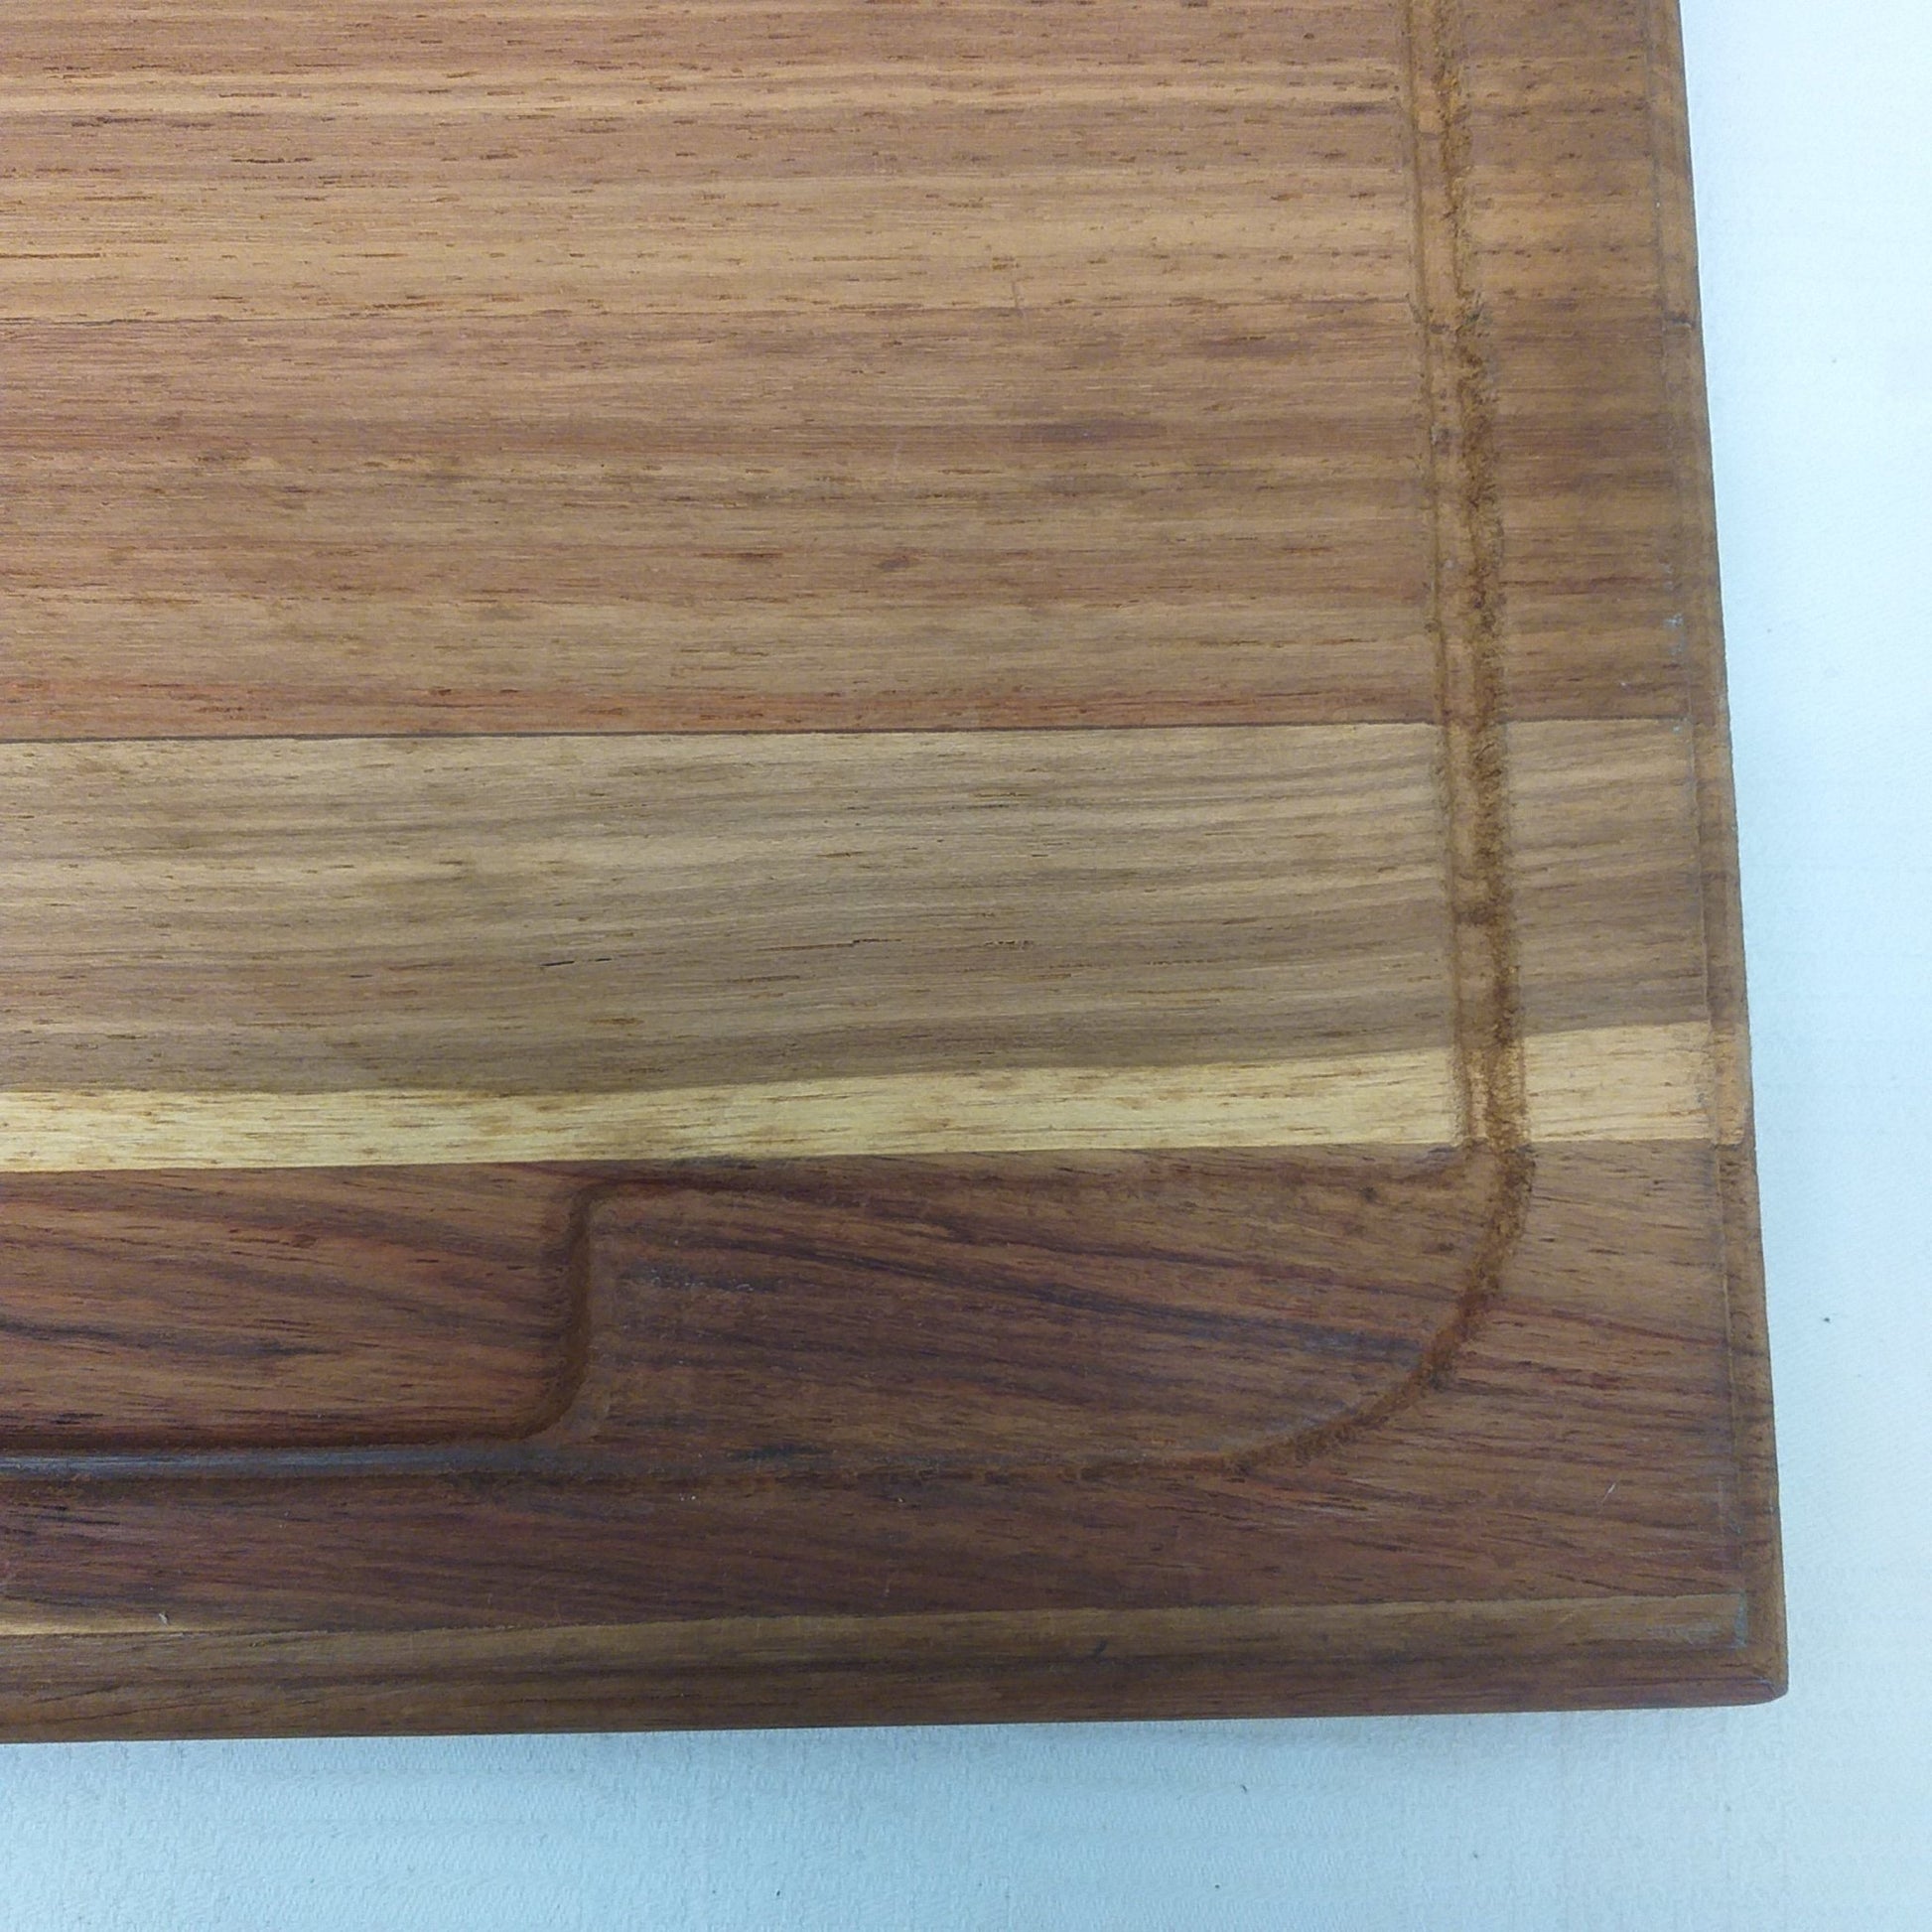 An awesome carved hardwood cutting/ carving board/ steak board with a juice groove - Lifespace